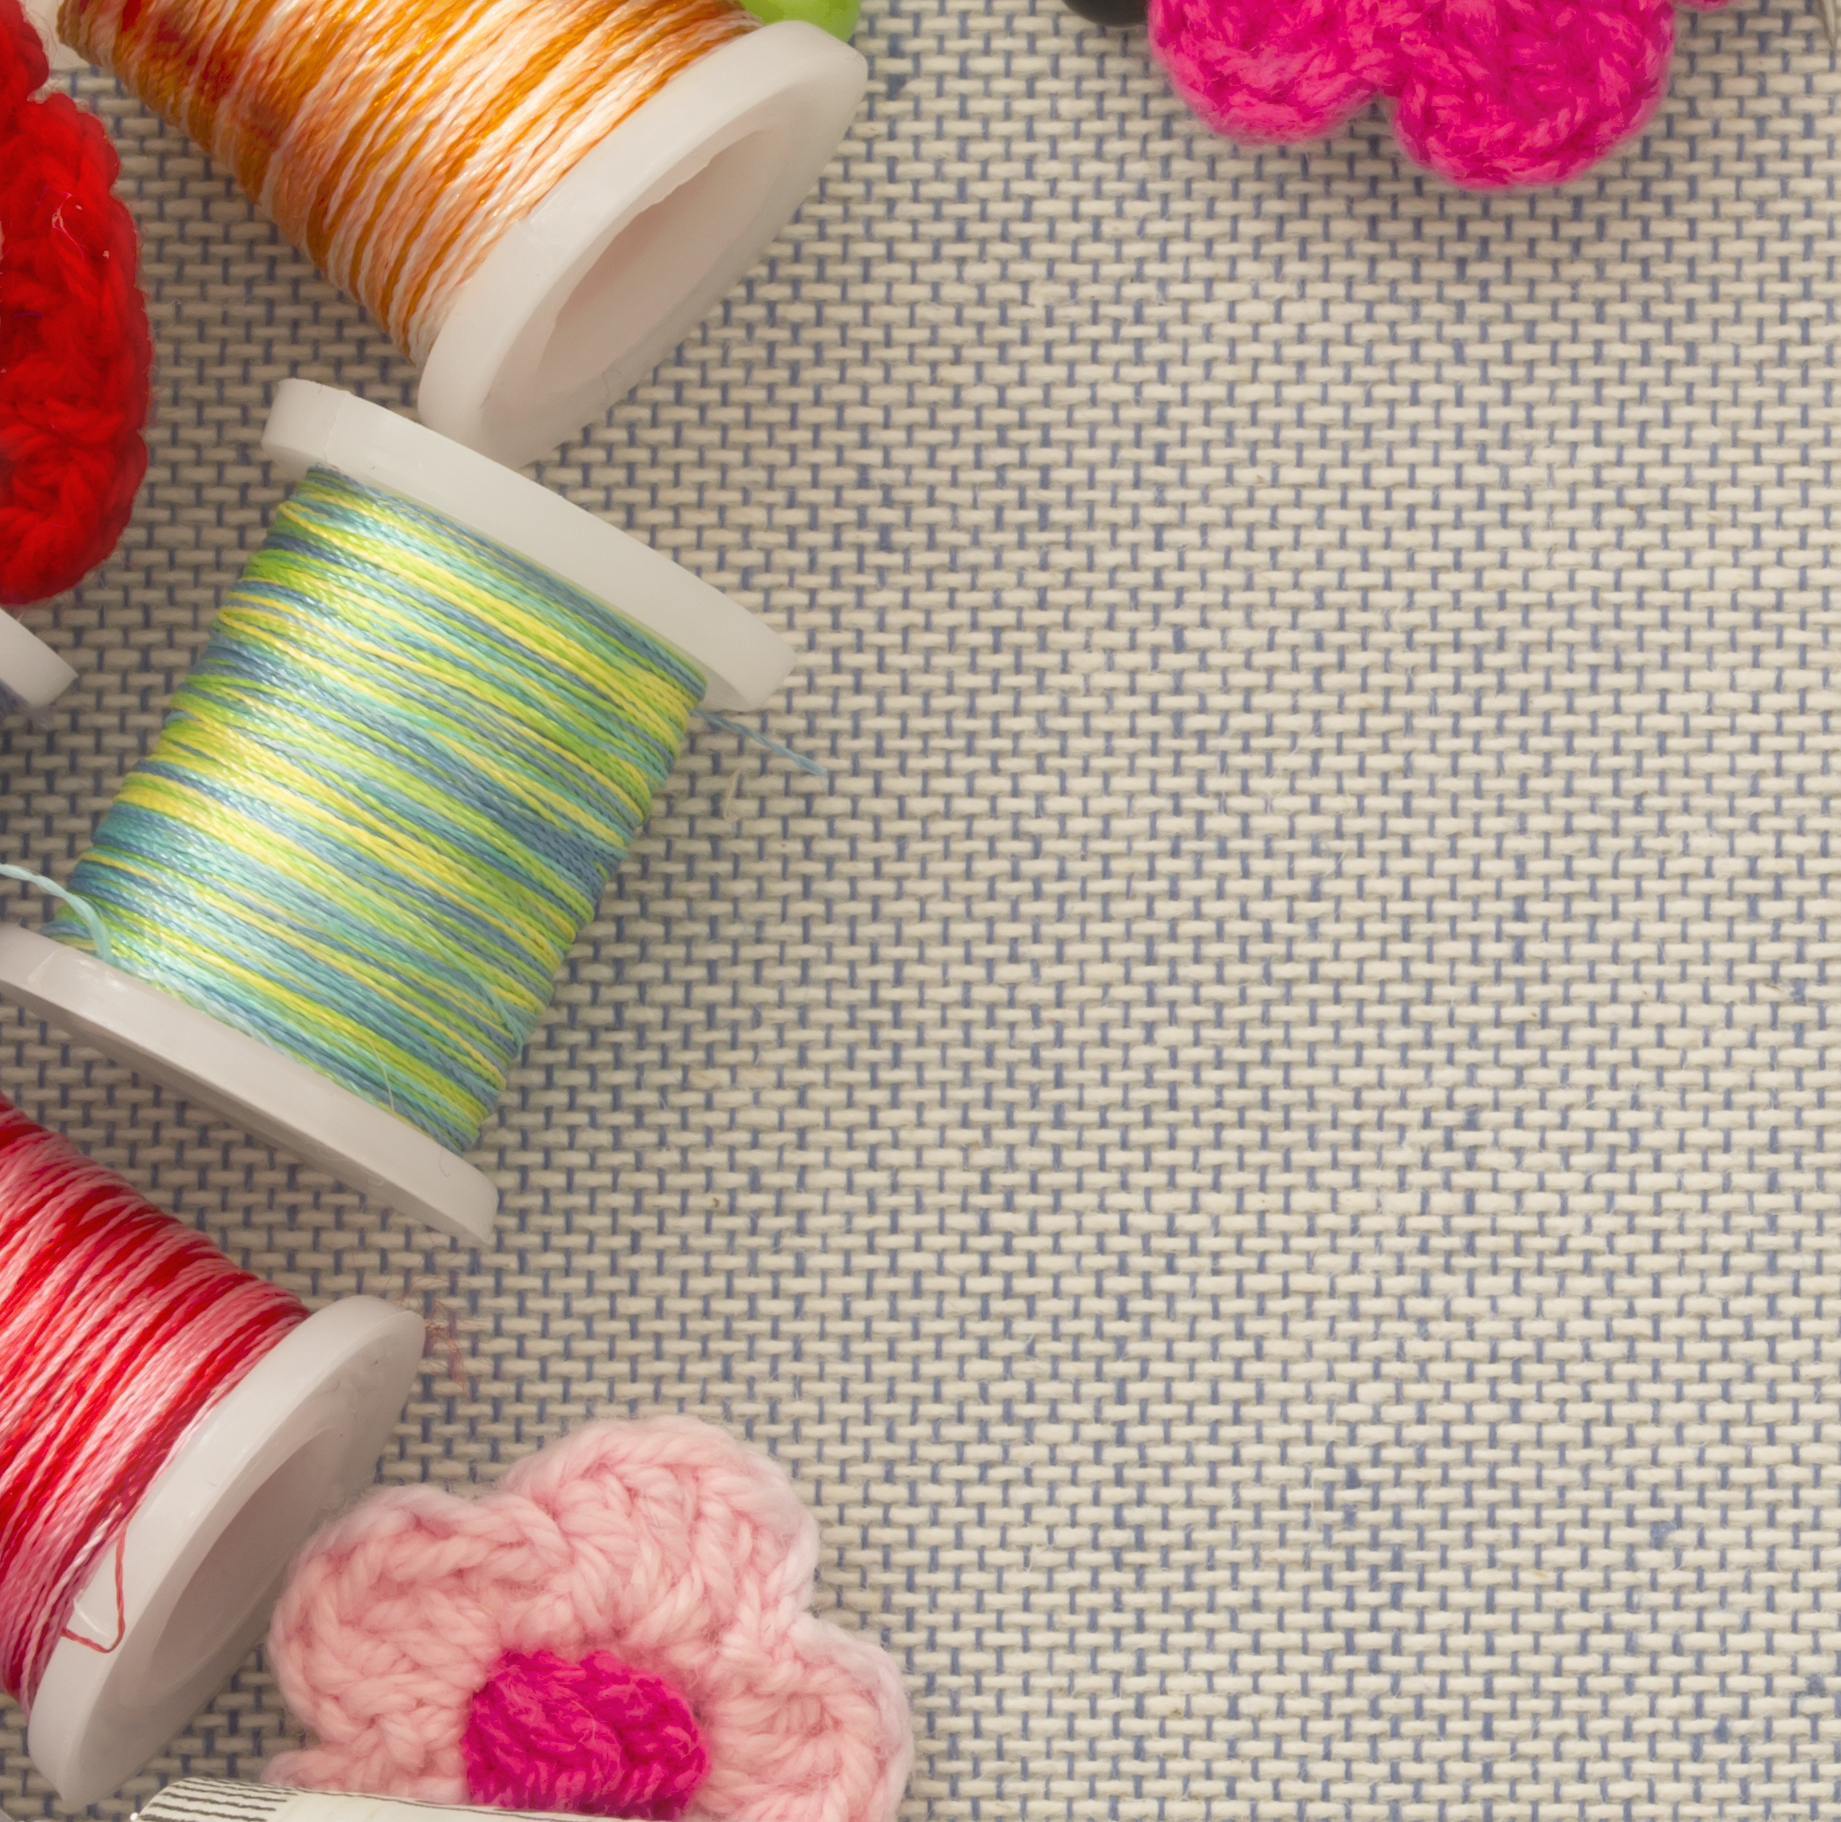 Spools of colorful thread and crocheted flowers on a burlap background